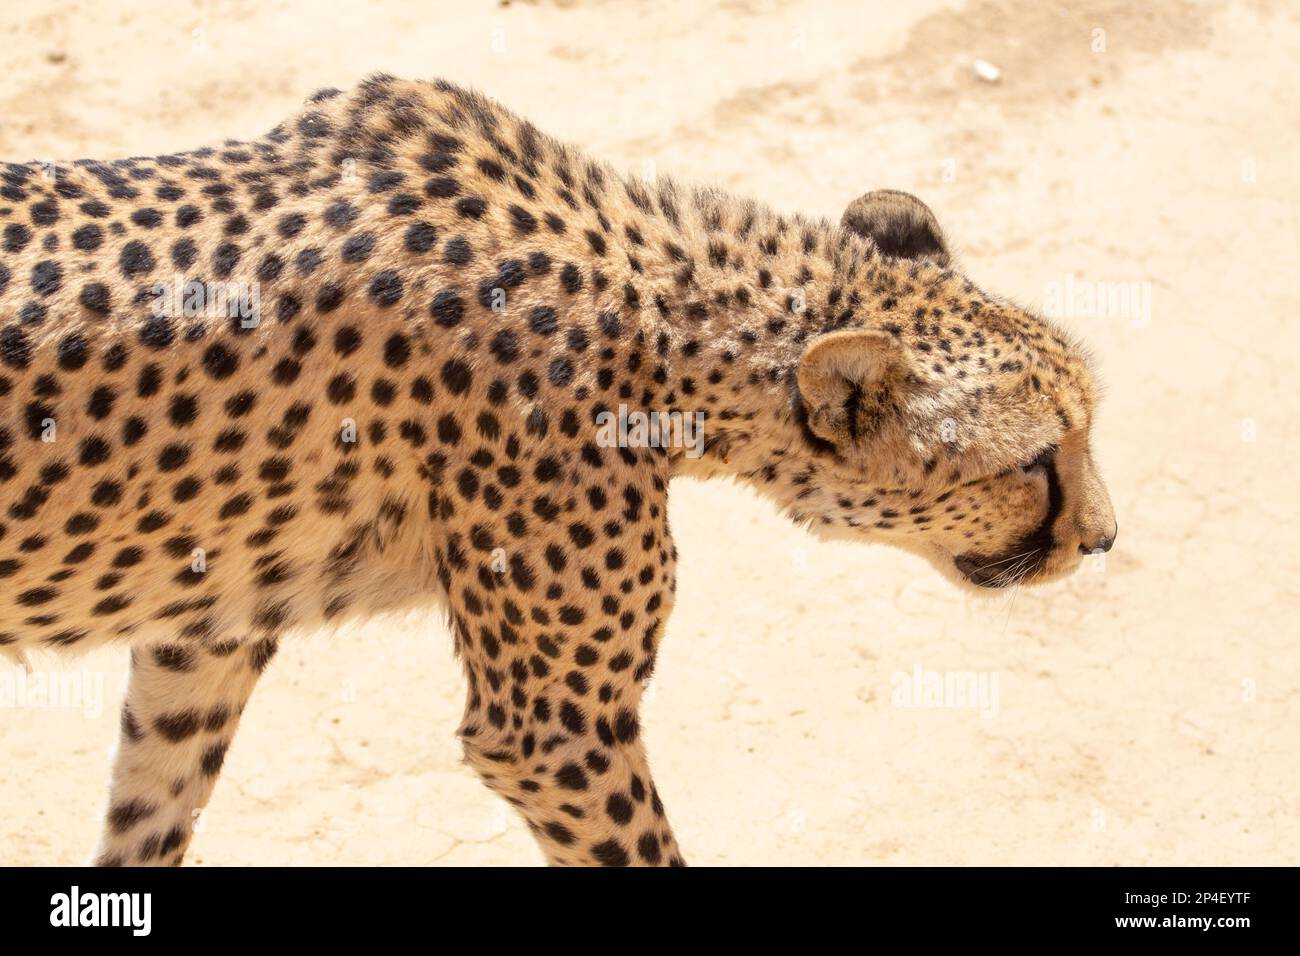 looking down on a cheetah Stock Photo